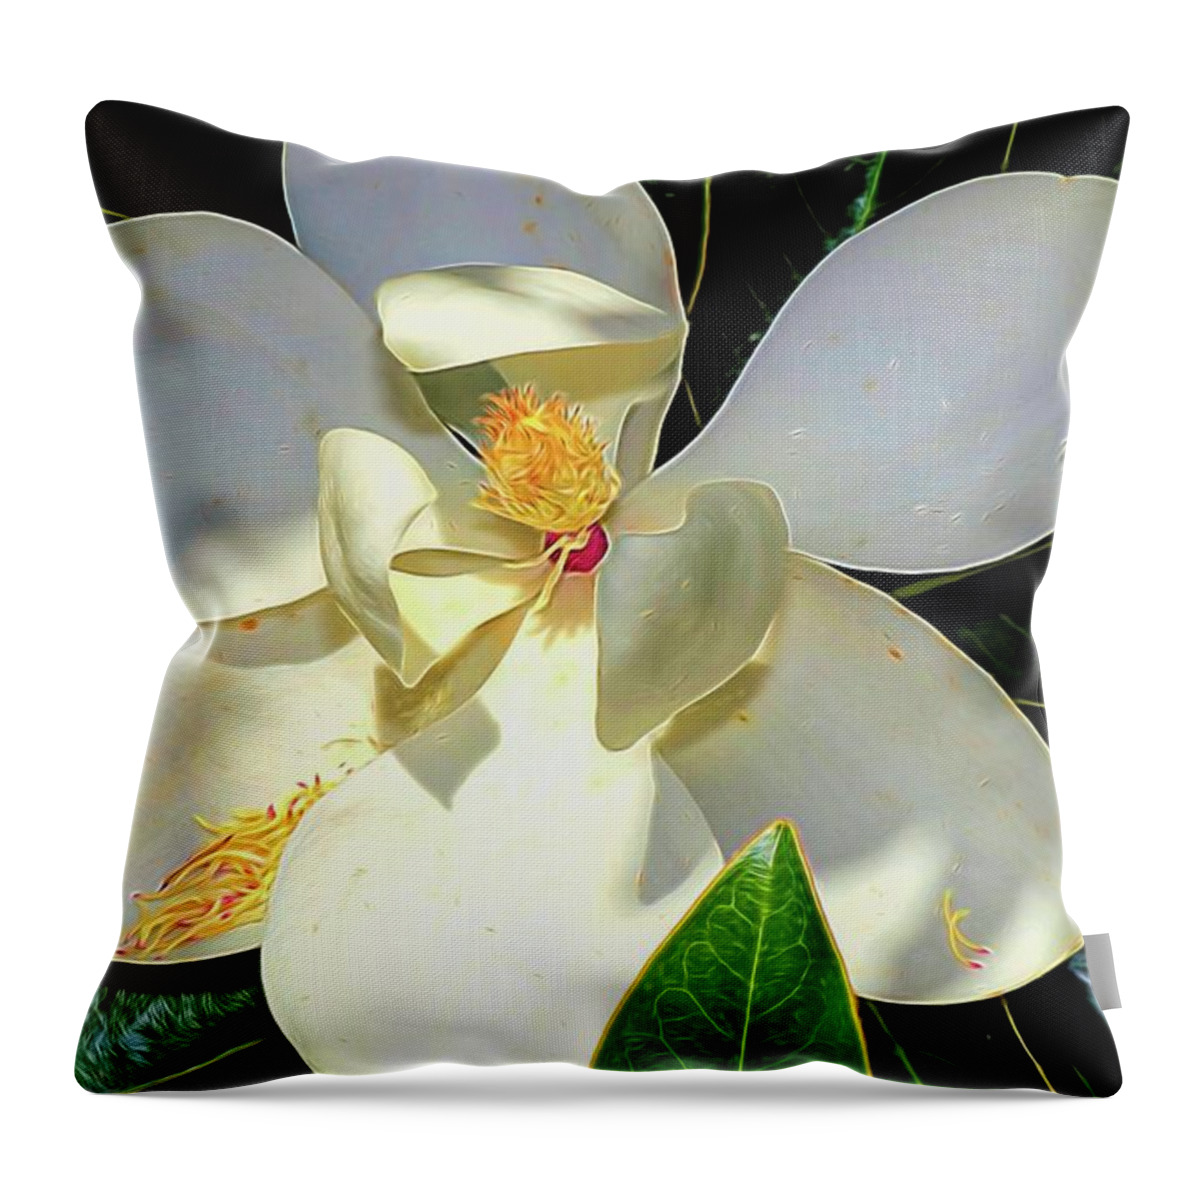 Flower Photography Throw Pillow featuring the photograph In the Shade by Diana Mary Sharpton